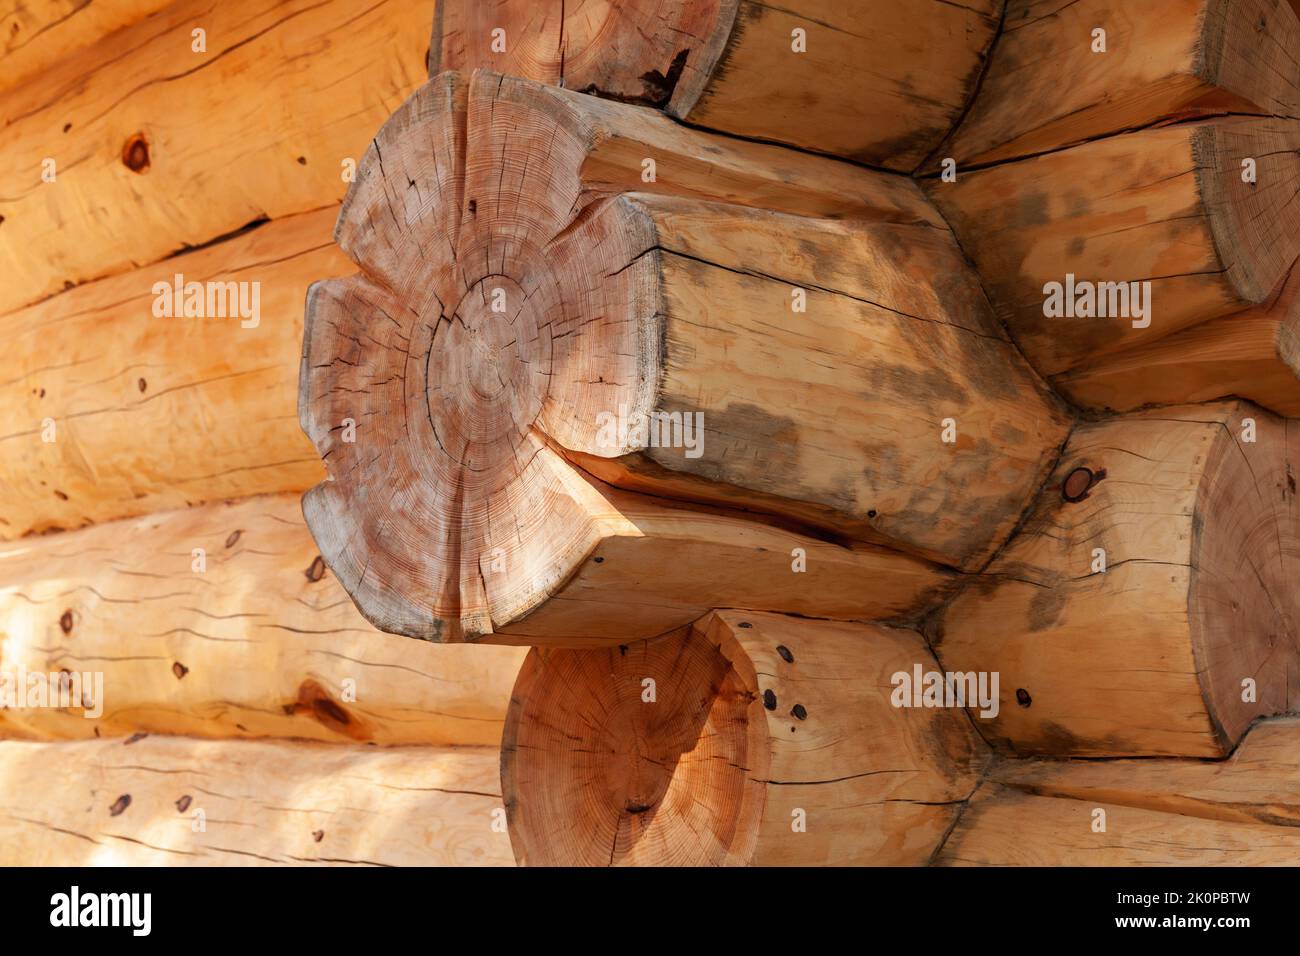 Exterior details of a wooden house made of Siberian Pine logs Stock Photo